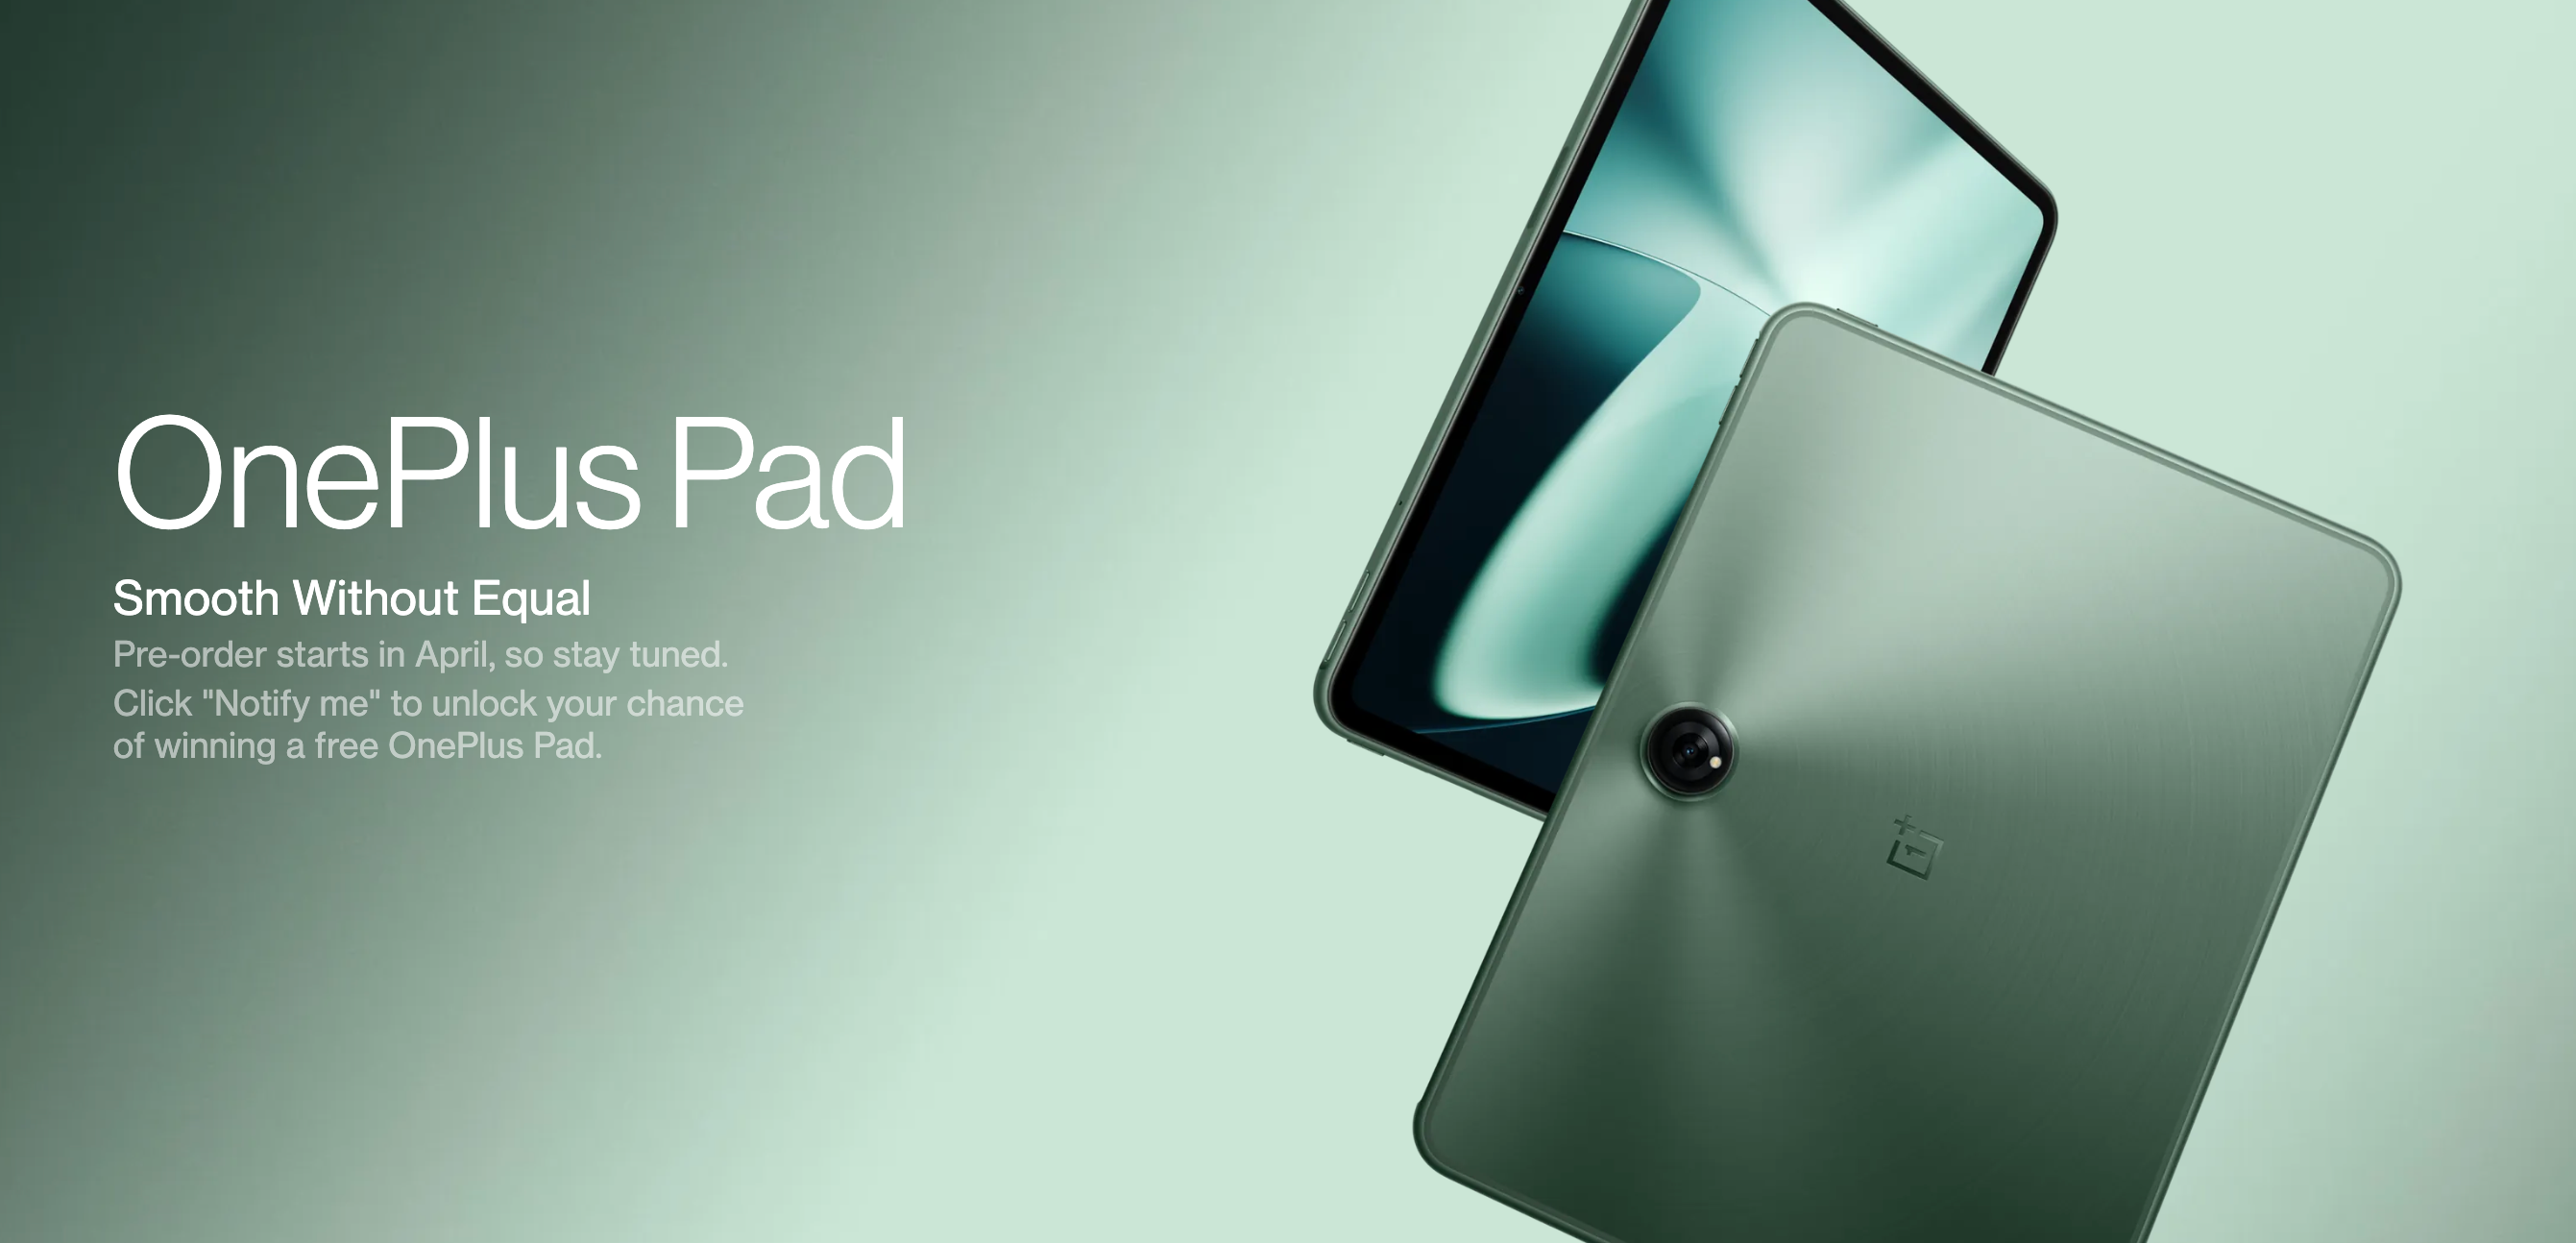 OnePlus Pad in nice green color